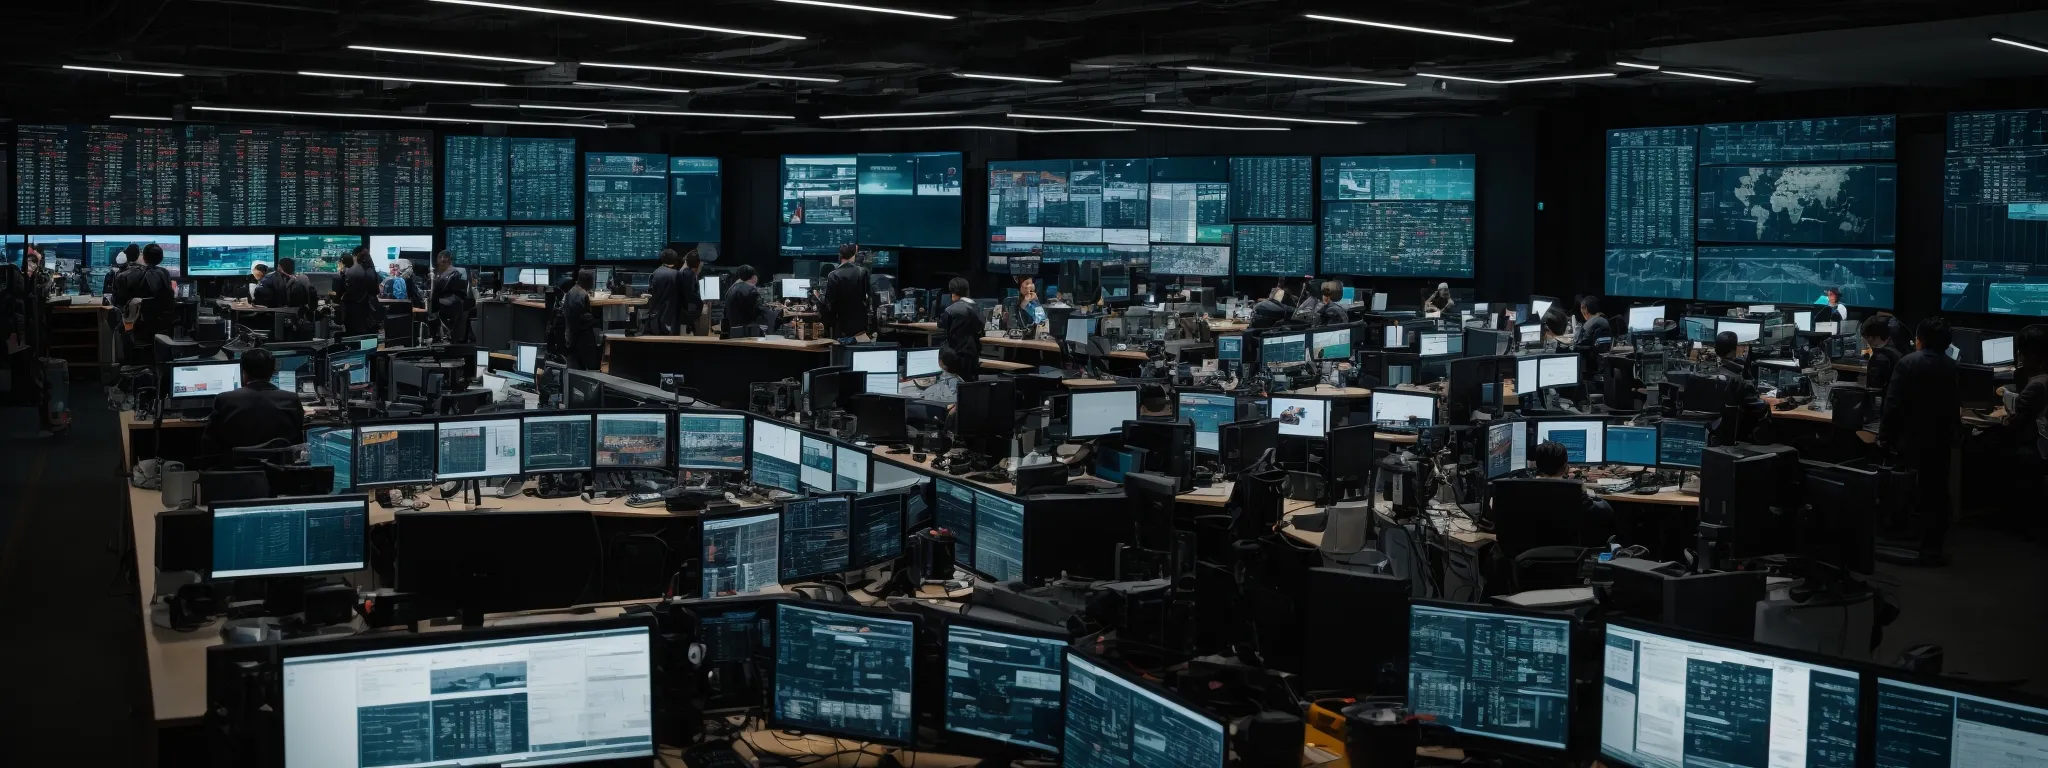 a bustling digital operations center with screens displaying website analytics and status reports.